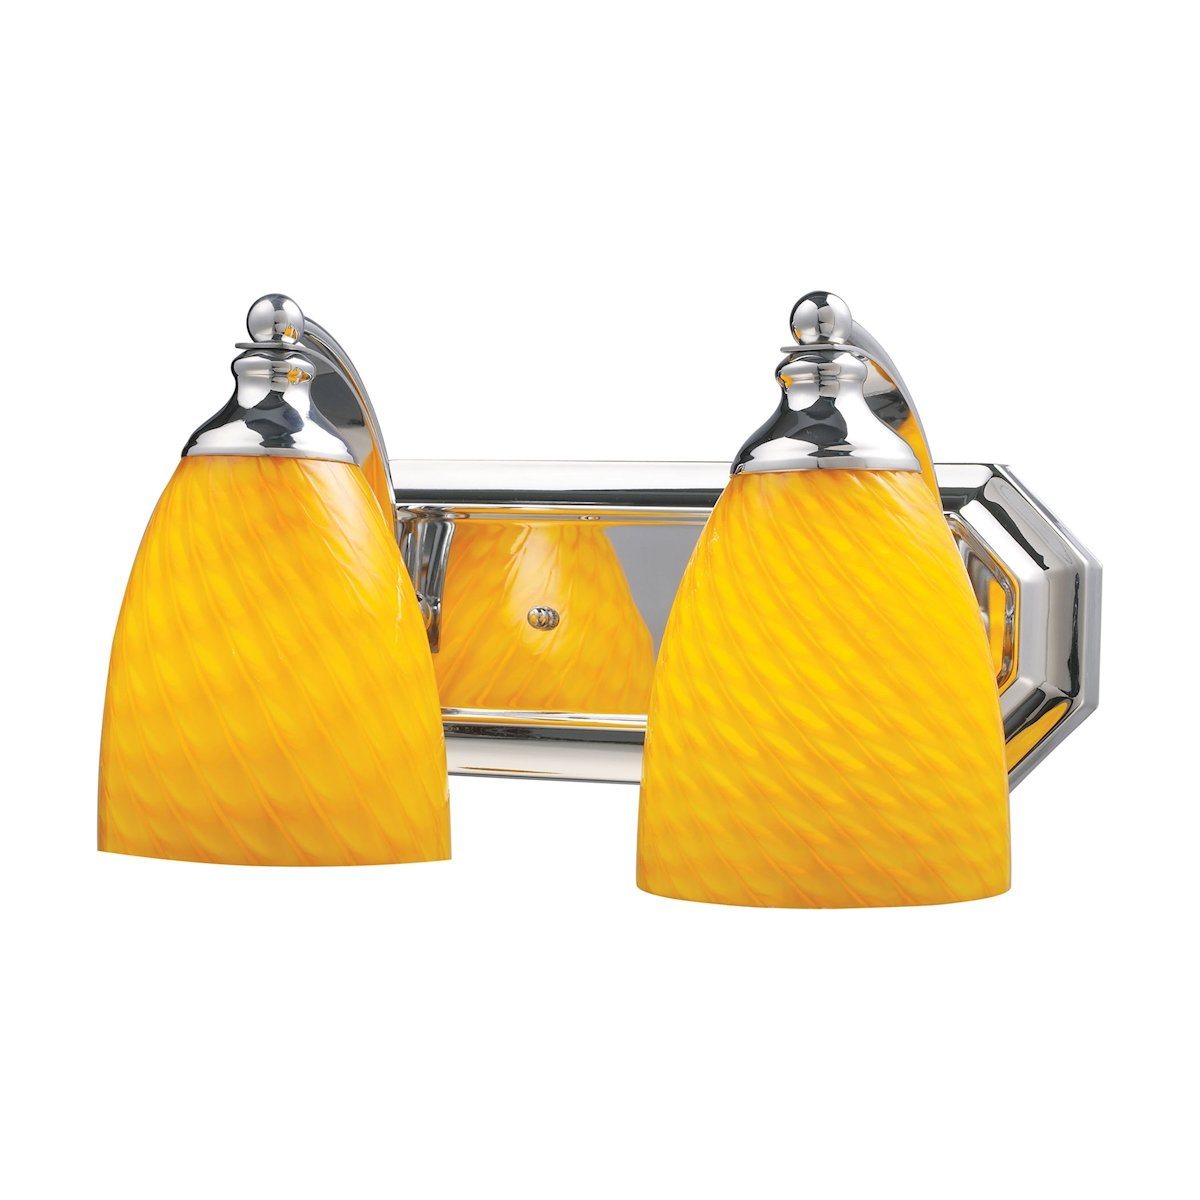 Bath And Spa 2 Light Vanity In Polished Chrome And Canary Glass Wall Elk Lighting 